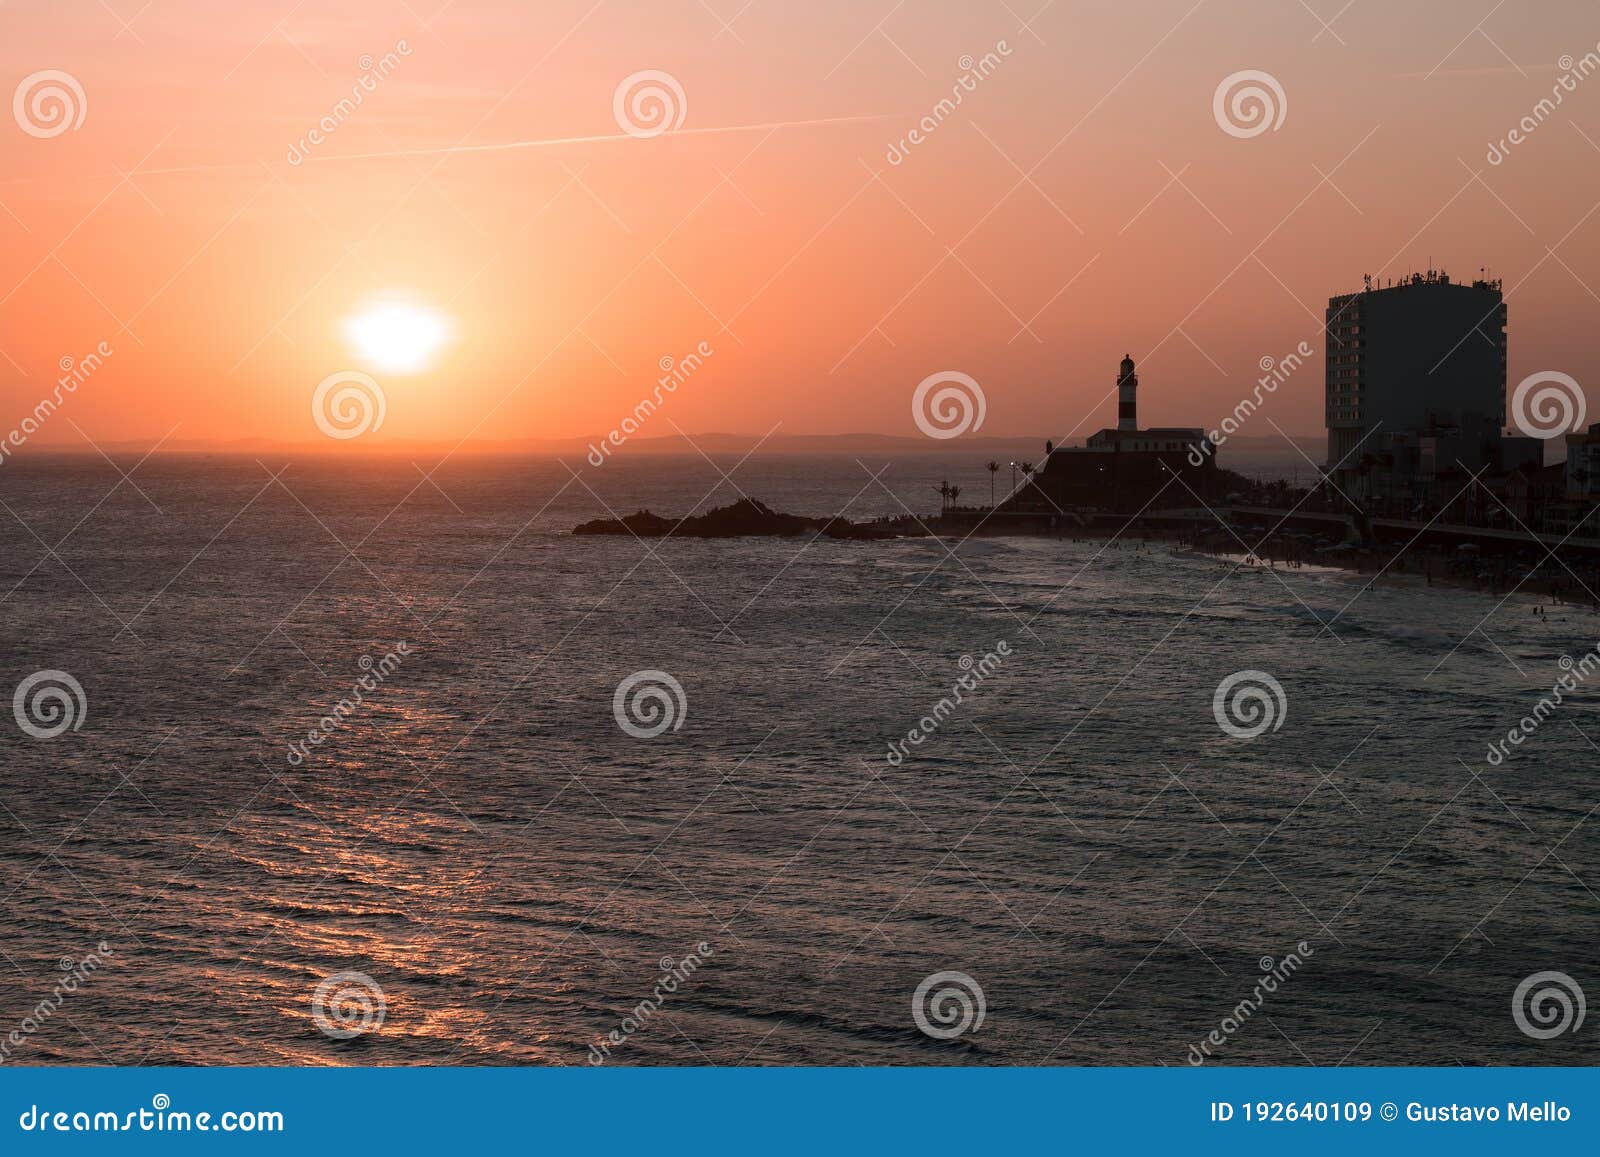 view of the sunset on the beach bar with the barra lighthouse in the background